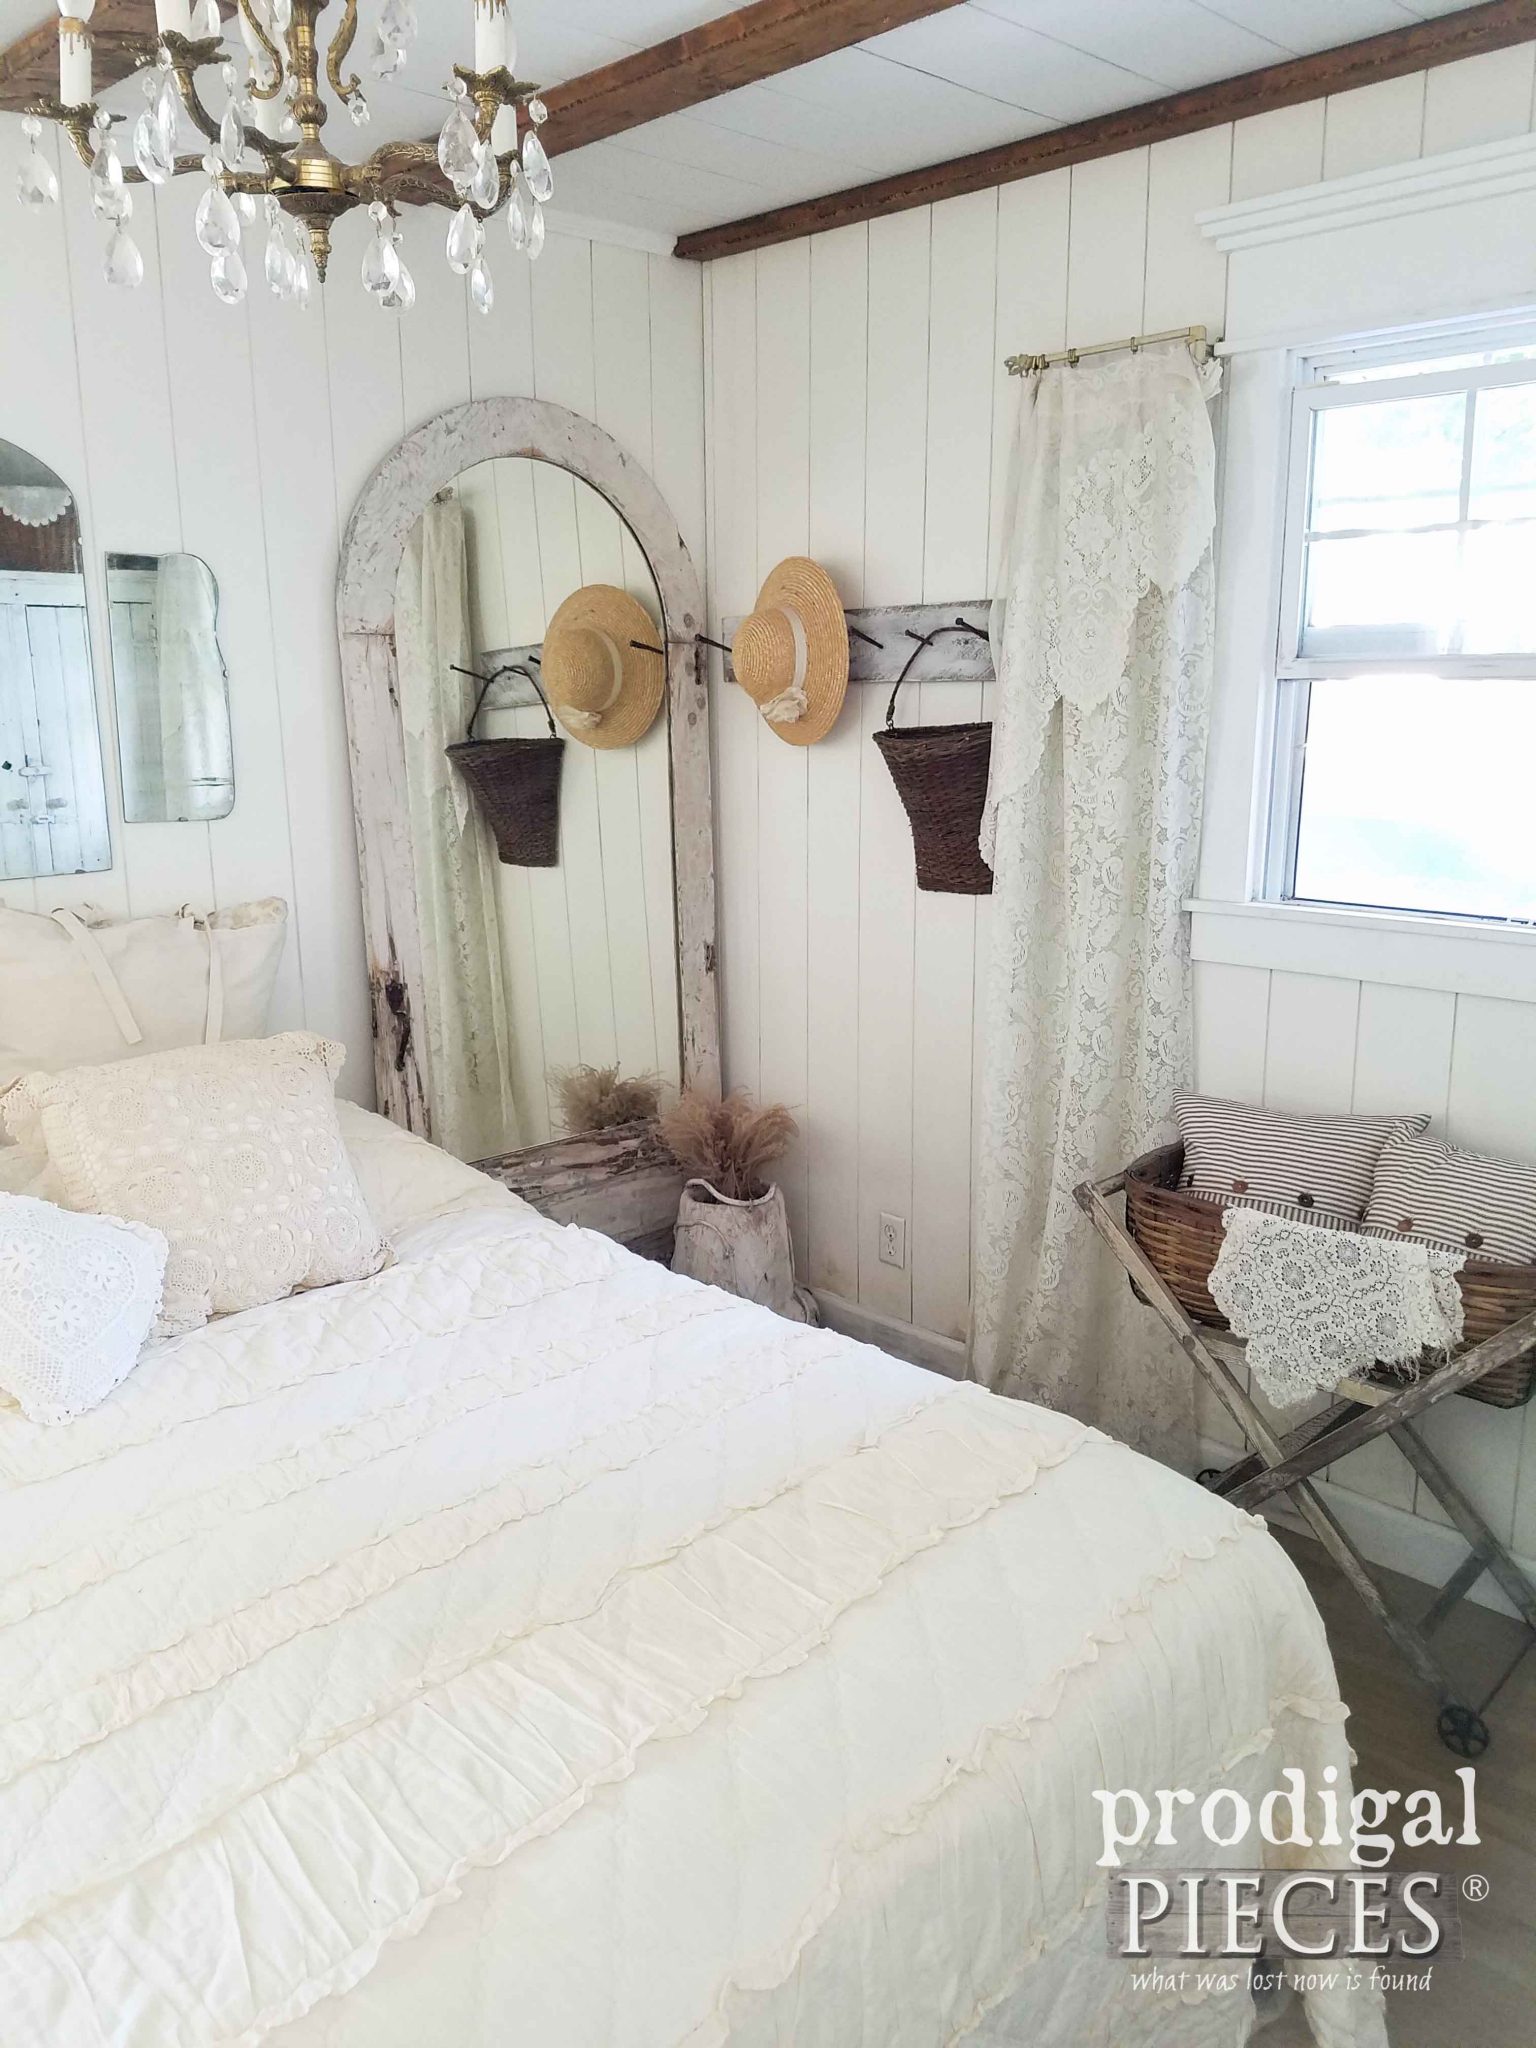 Farmhouse Style Bedroom Decorated with Repurposed Door Mirror and Found Items by Prodigal Pieces | prodigalpieces.com